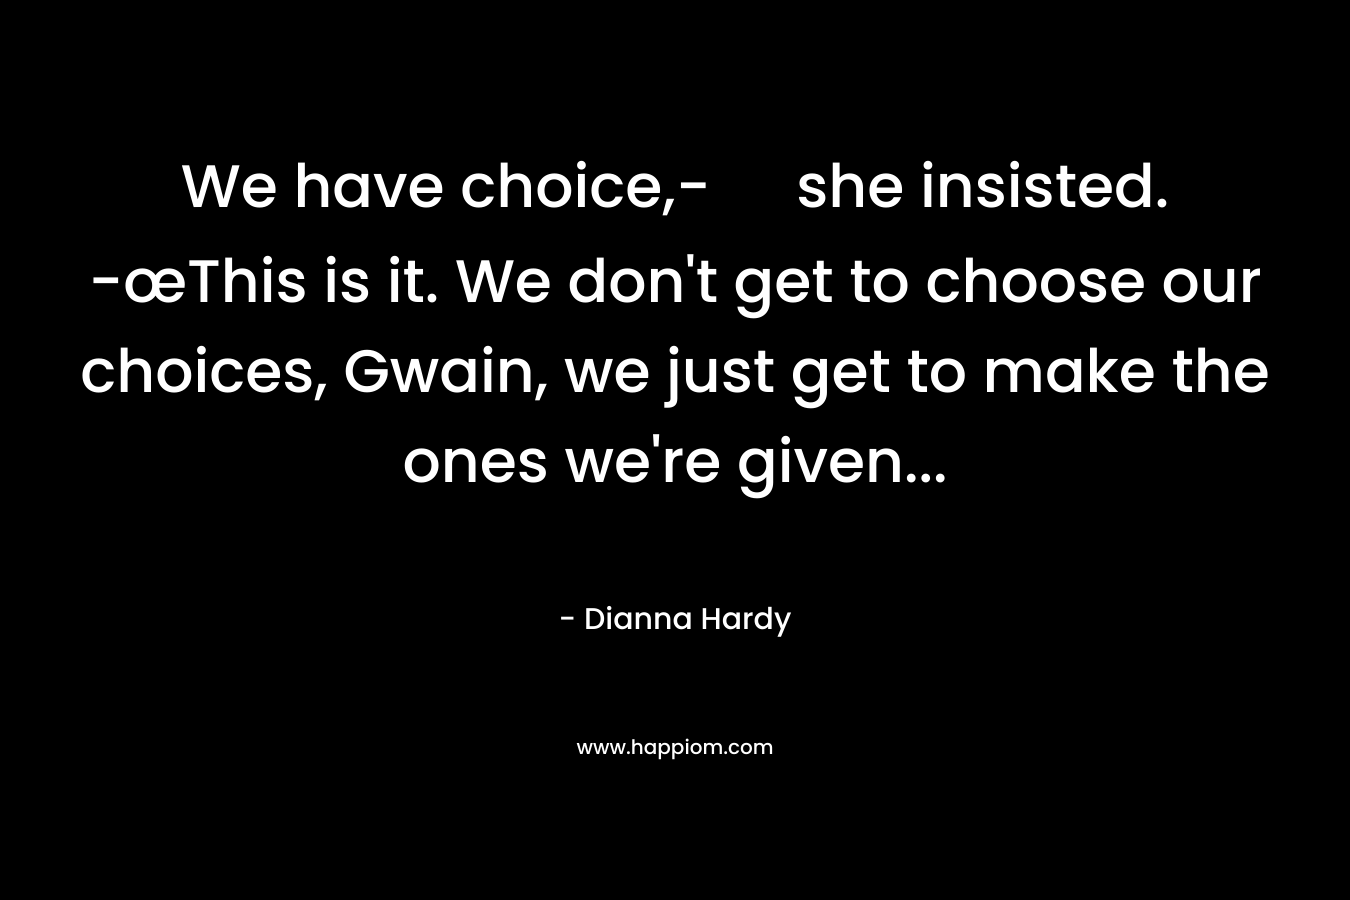 We have choice,- she insisted. -œThis is it. We don’t get to choose our choices, Gwain, we just get to make the ones we’re given… – Dianna Hardy